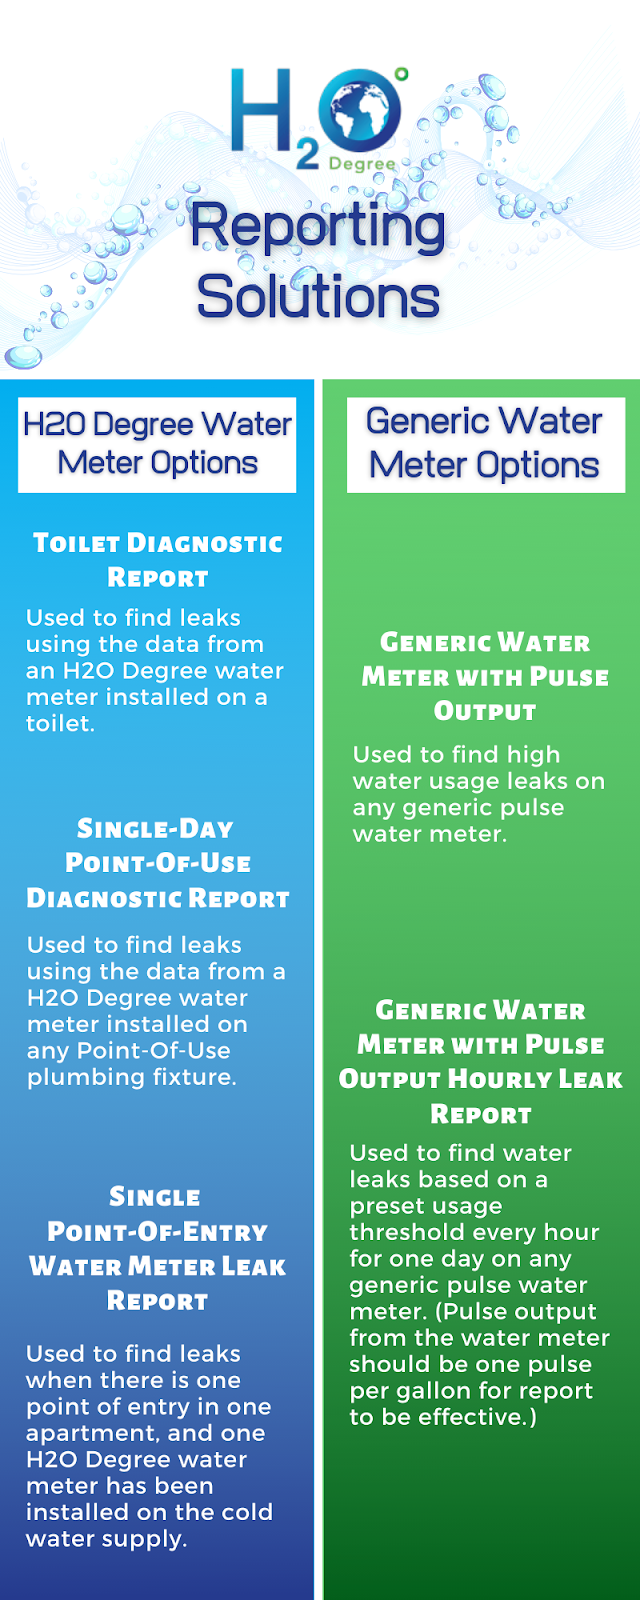 Infographic comparing generic water meter options with those from H2O Degree.